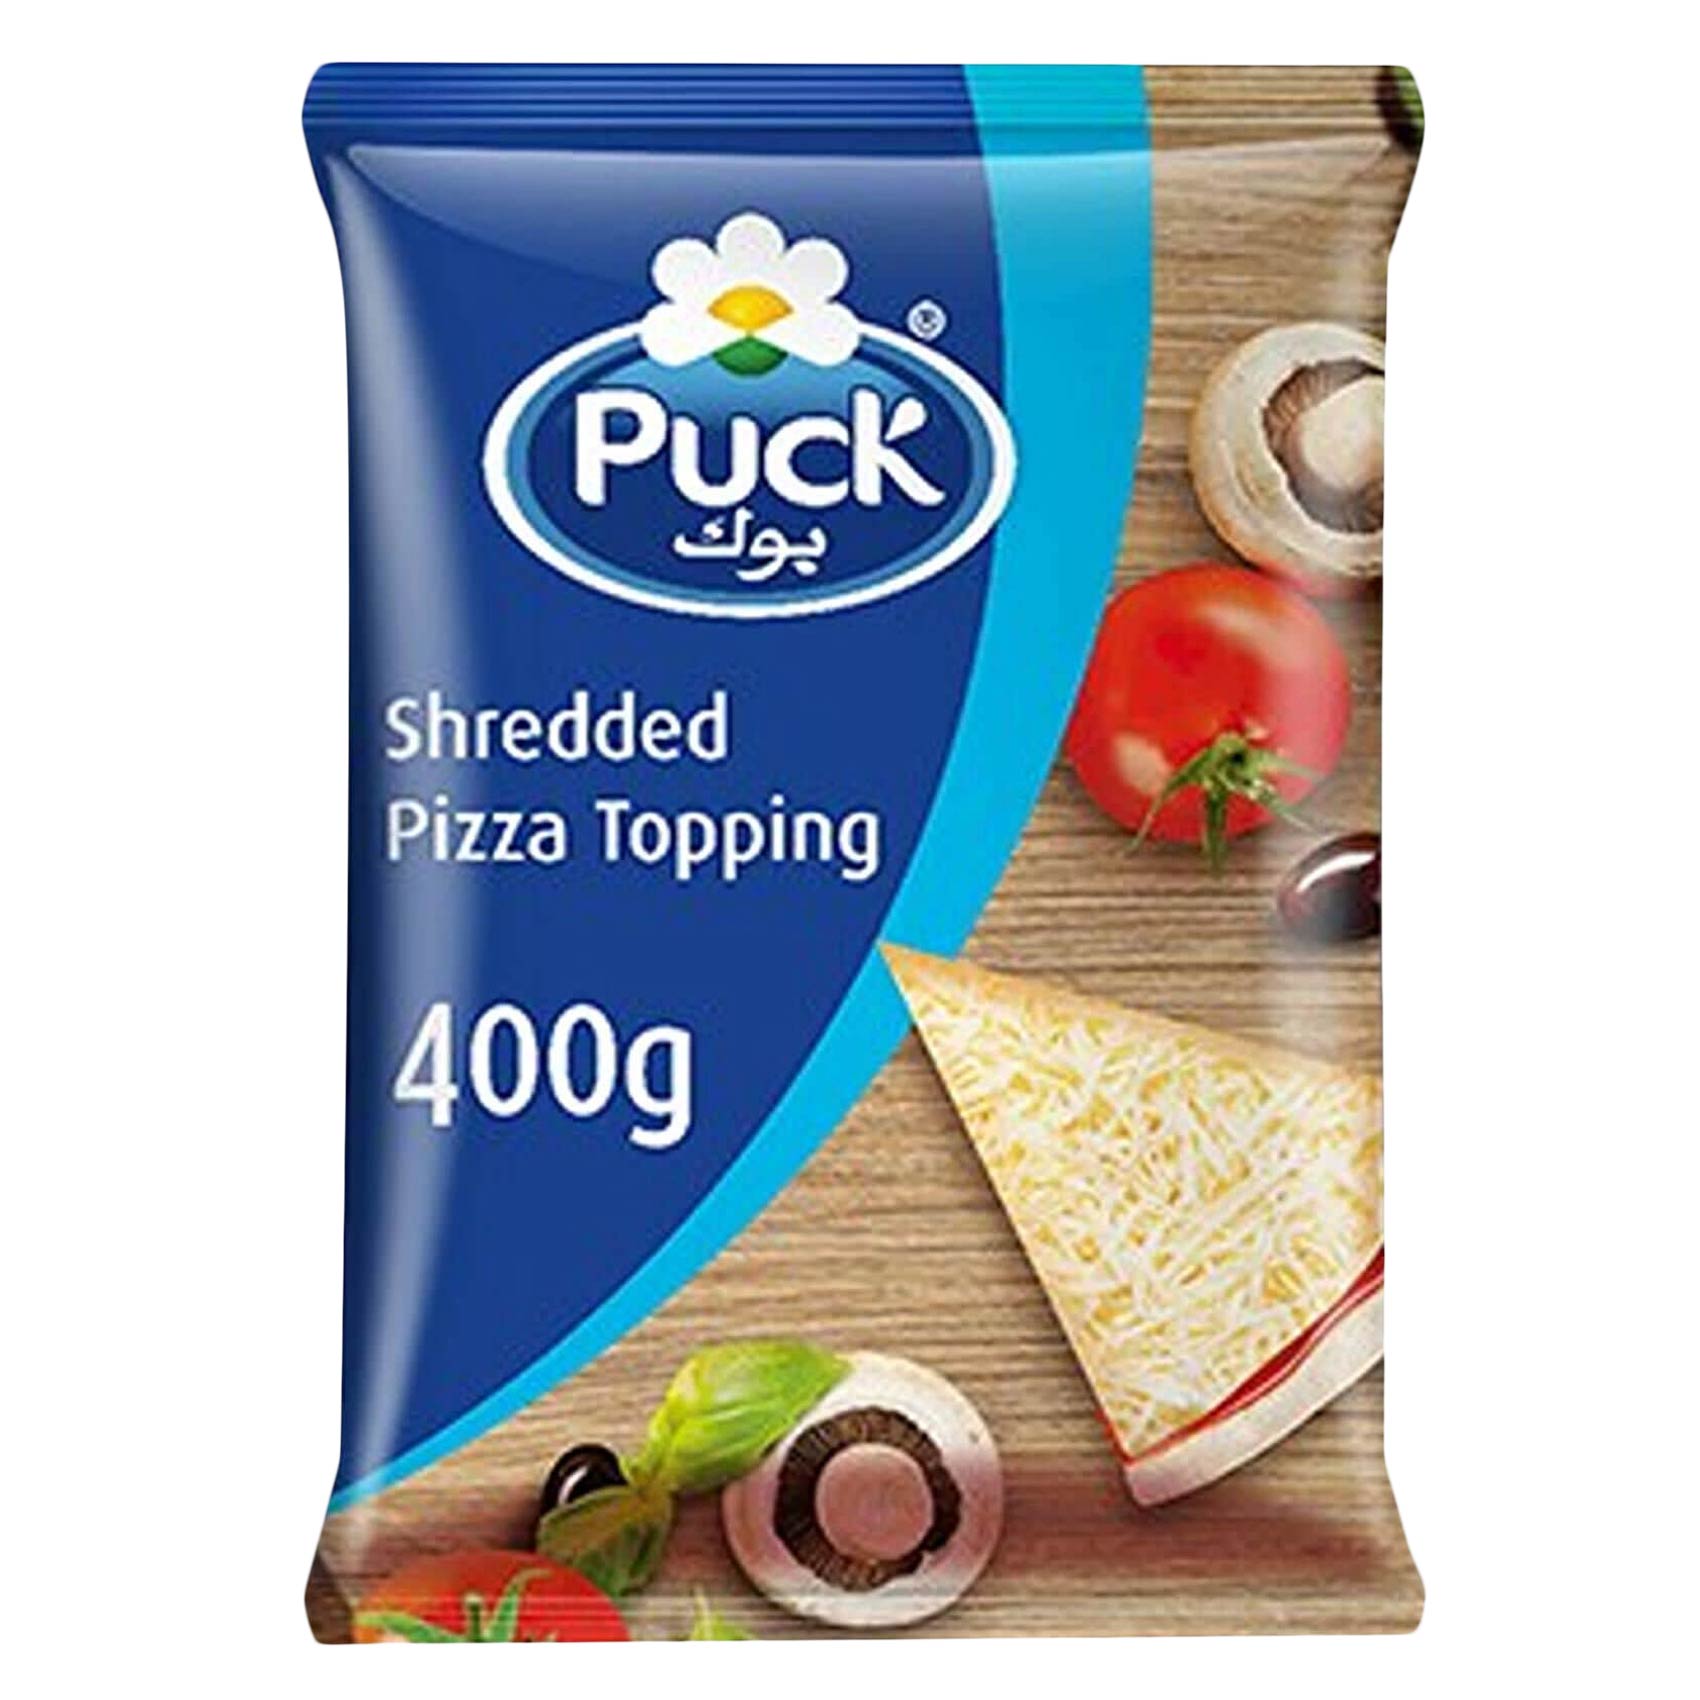 Puck Shredded Pizza Topping 400g